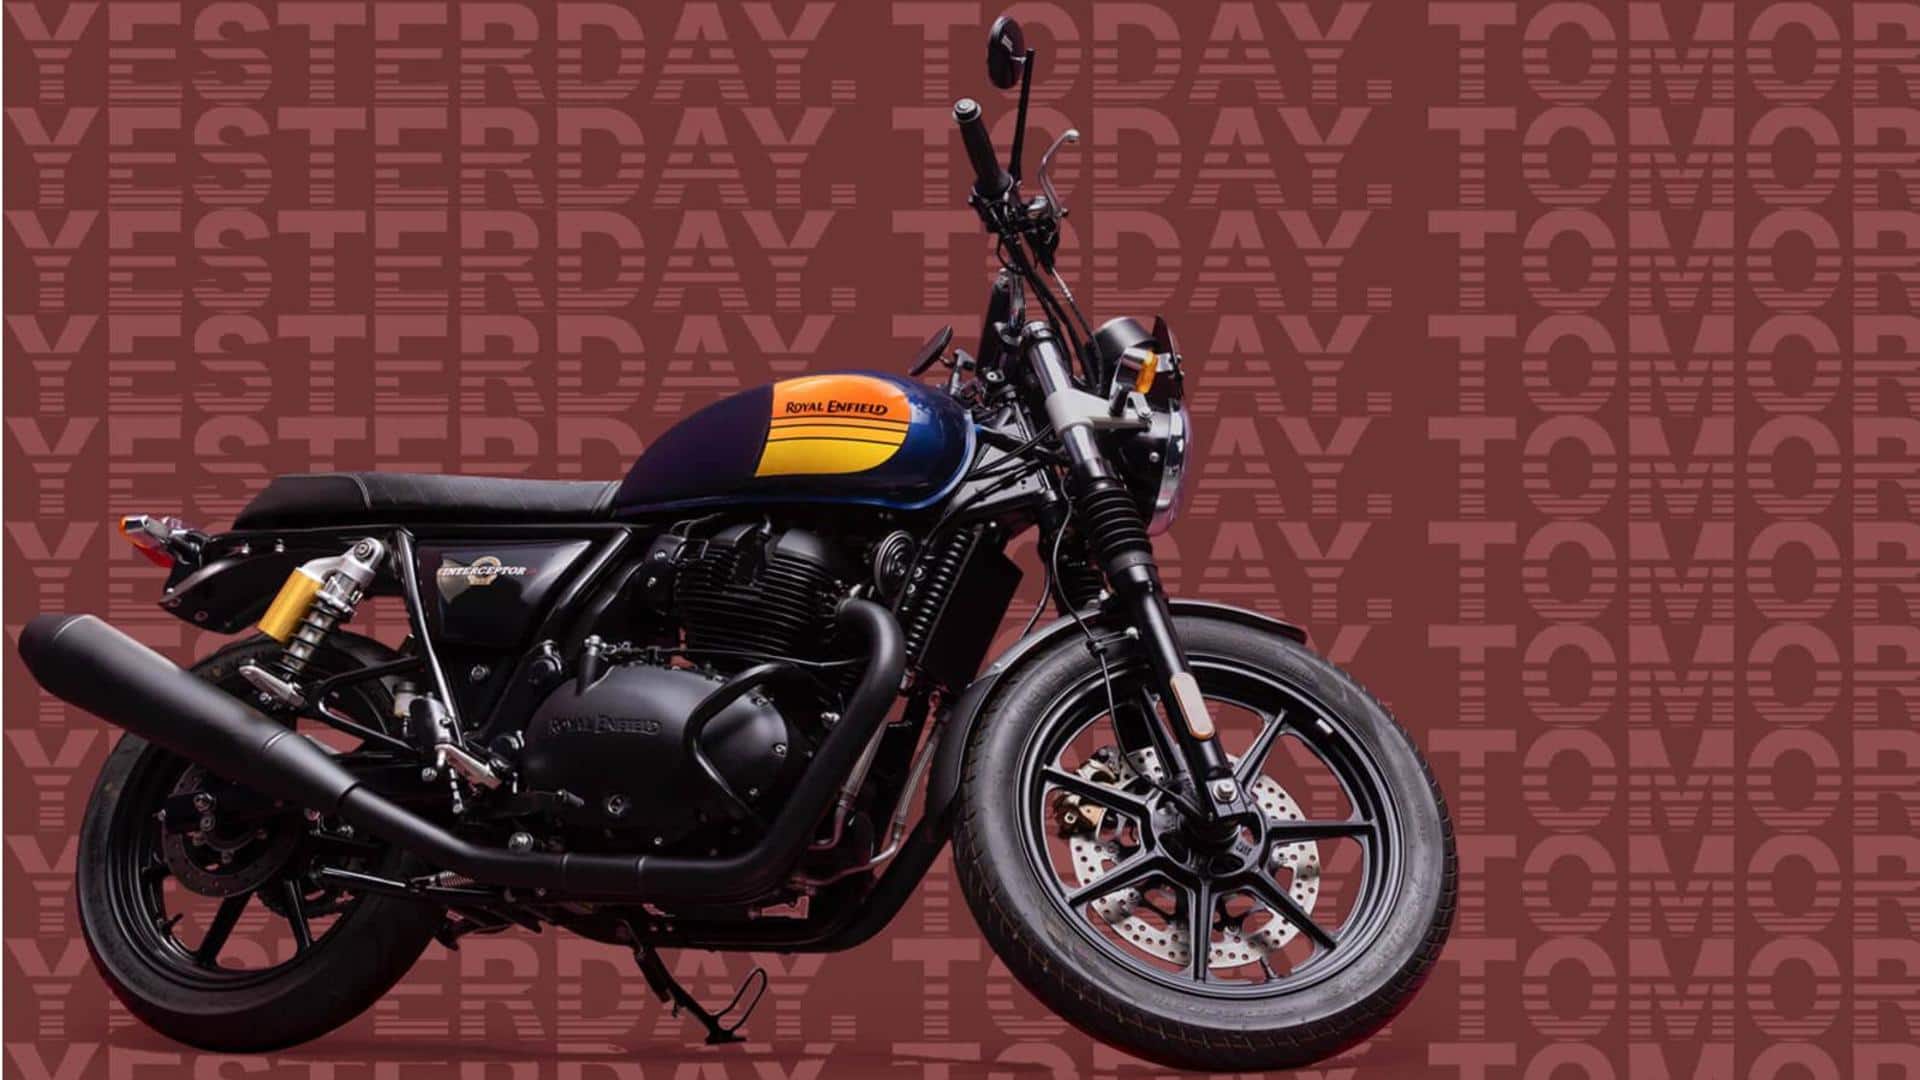 What to expect from upcoming Royal Enfield Interceptor Bear 650